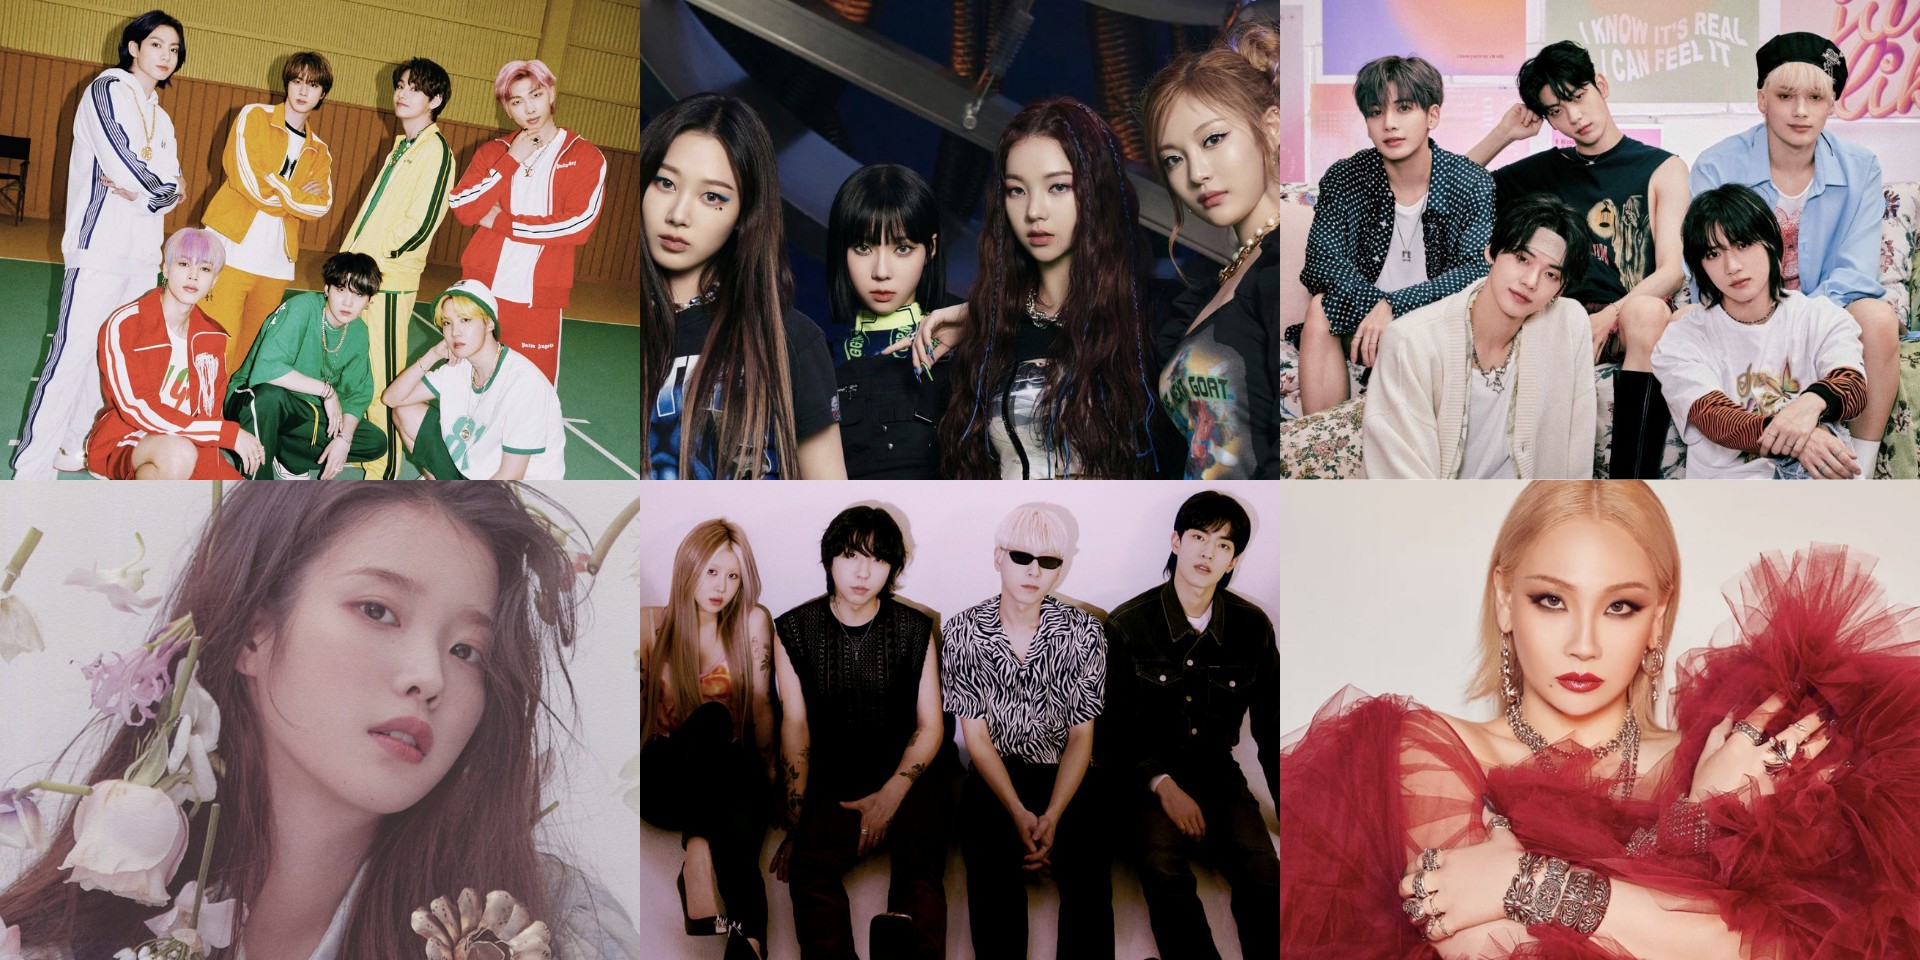 Here are the nominees for the 19th Korean Music Awards — BTS, aespa, IU, The Volunteers, TXT, CL, and more